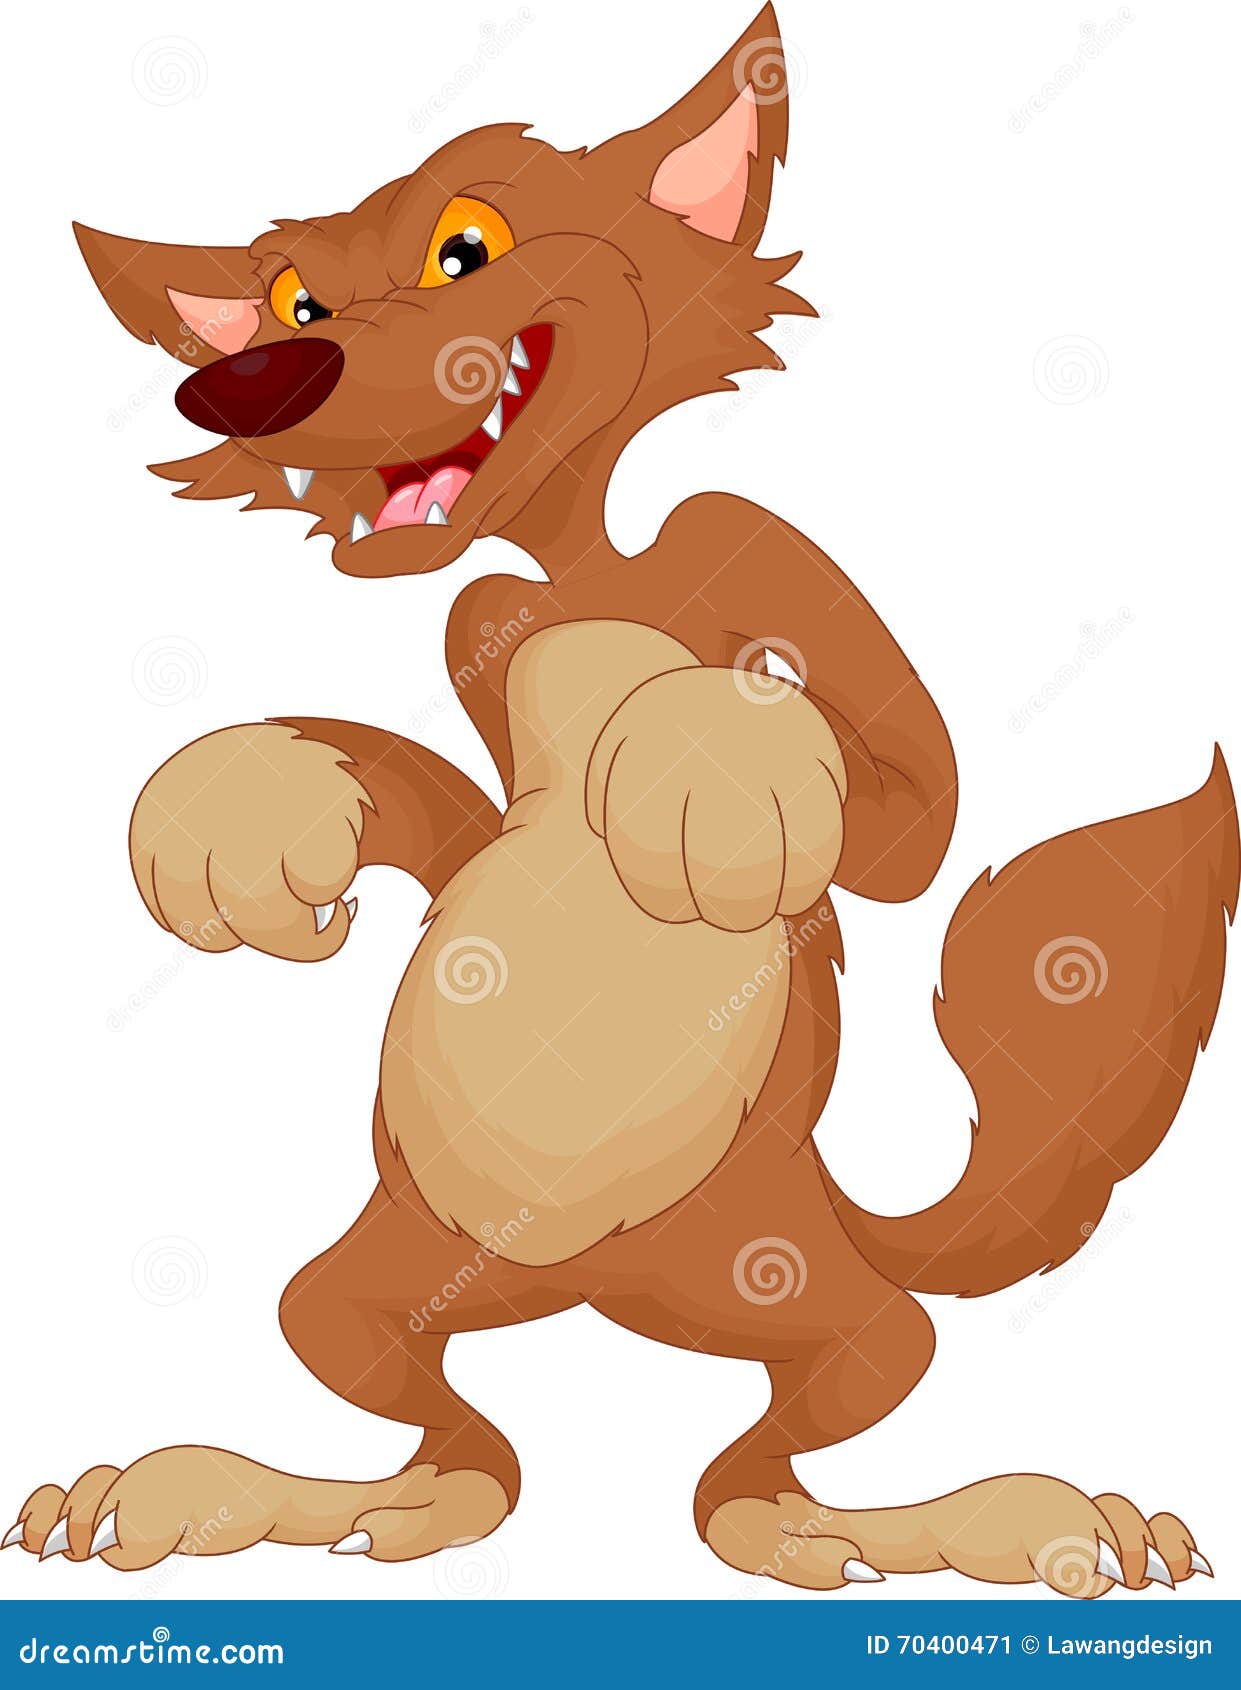 Angry wolf cartoon stock vector. Illustration of power - 70400471